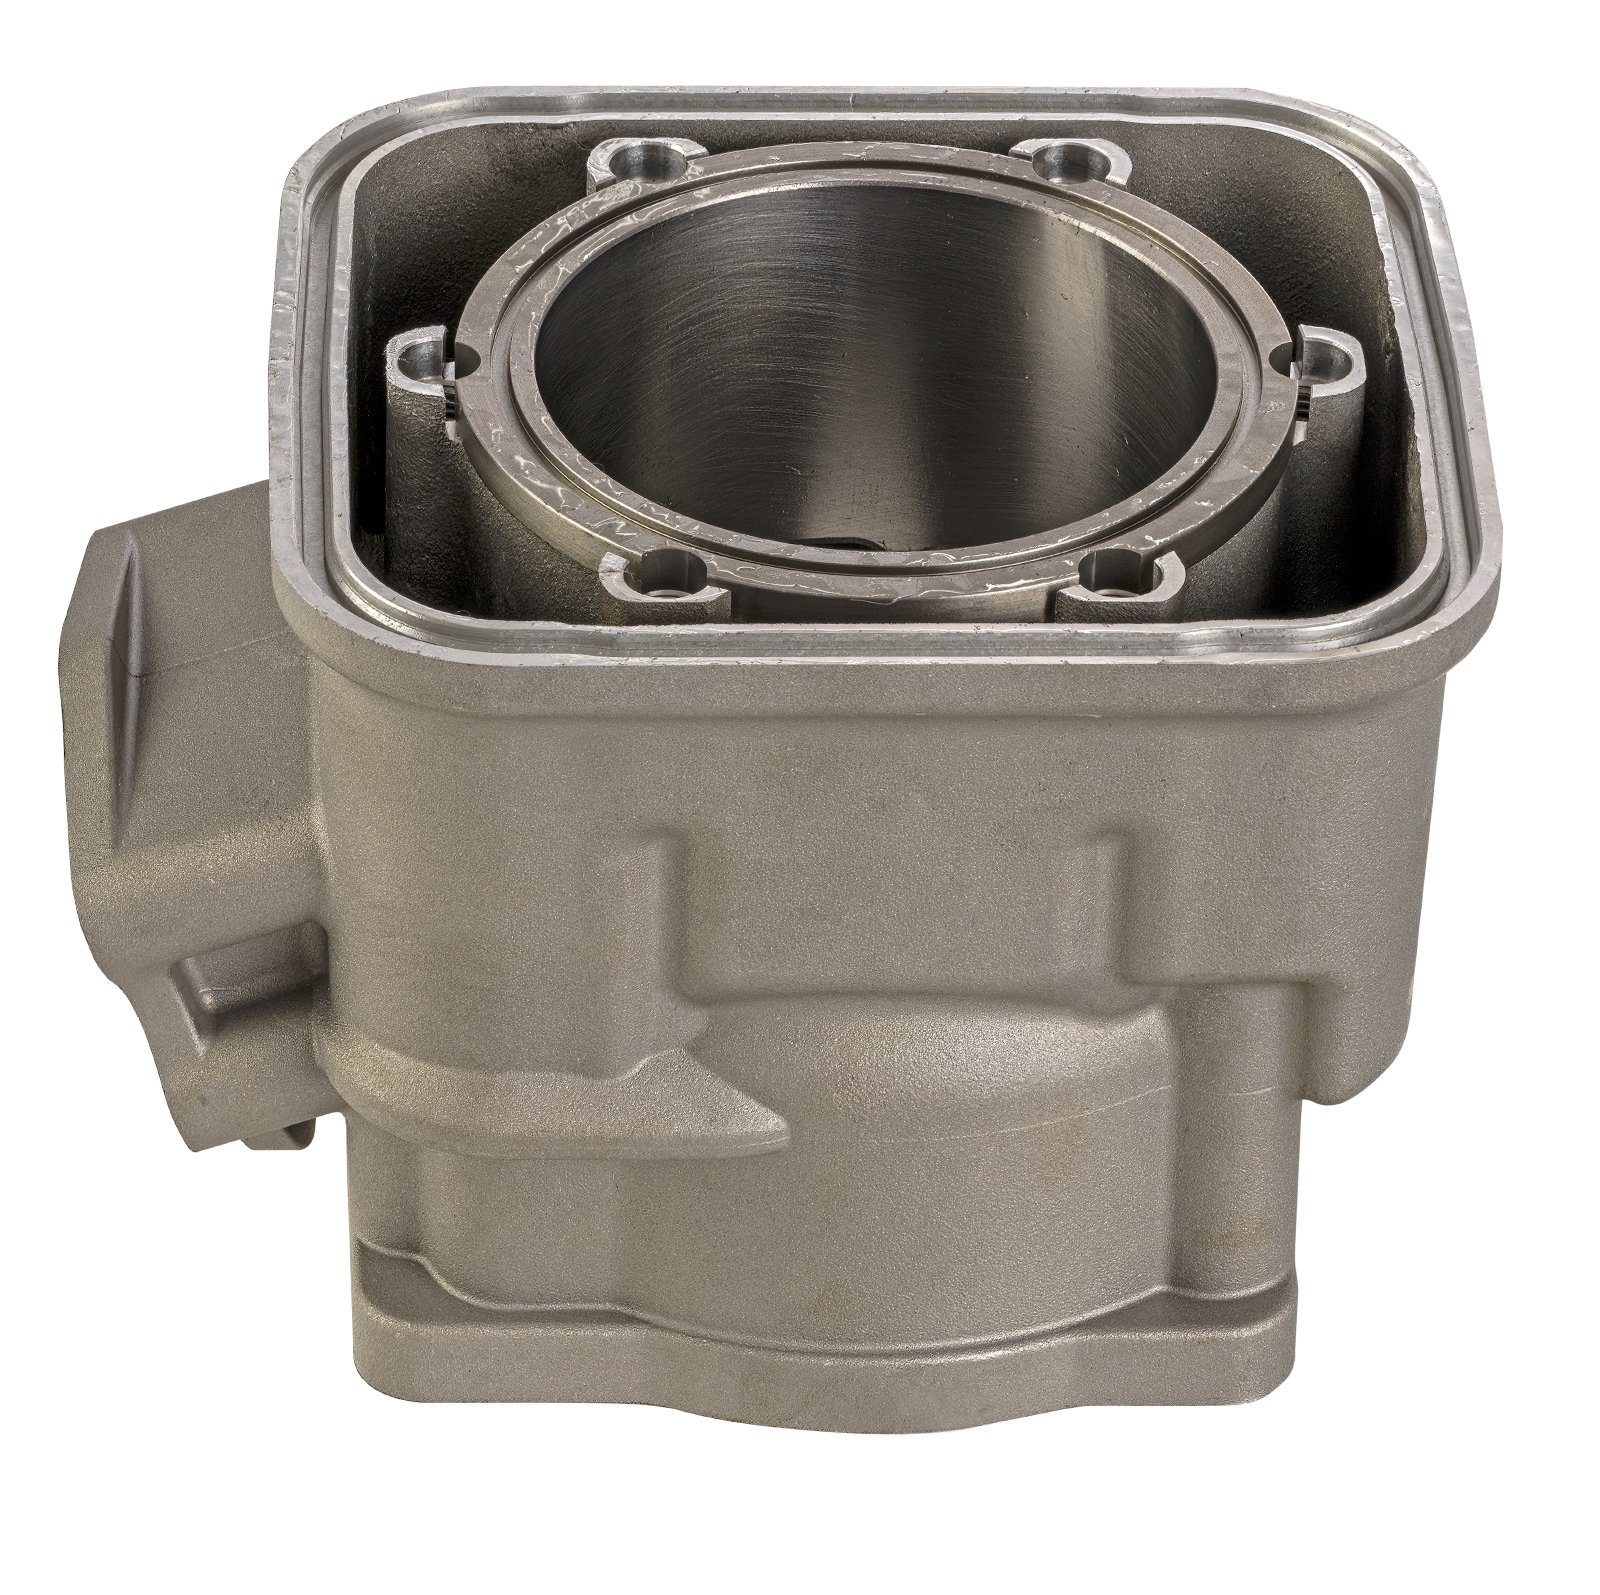 New Bare SBT Single Cylinder for Sea-Doo 717/720